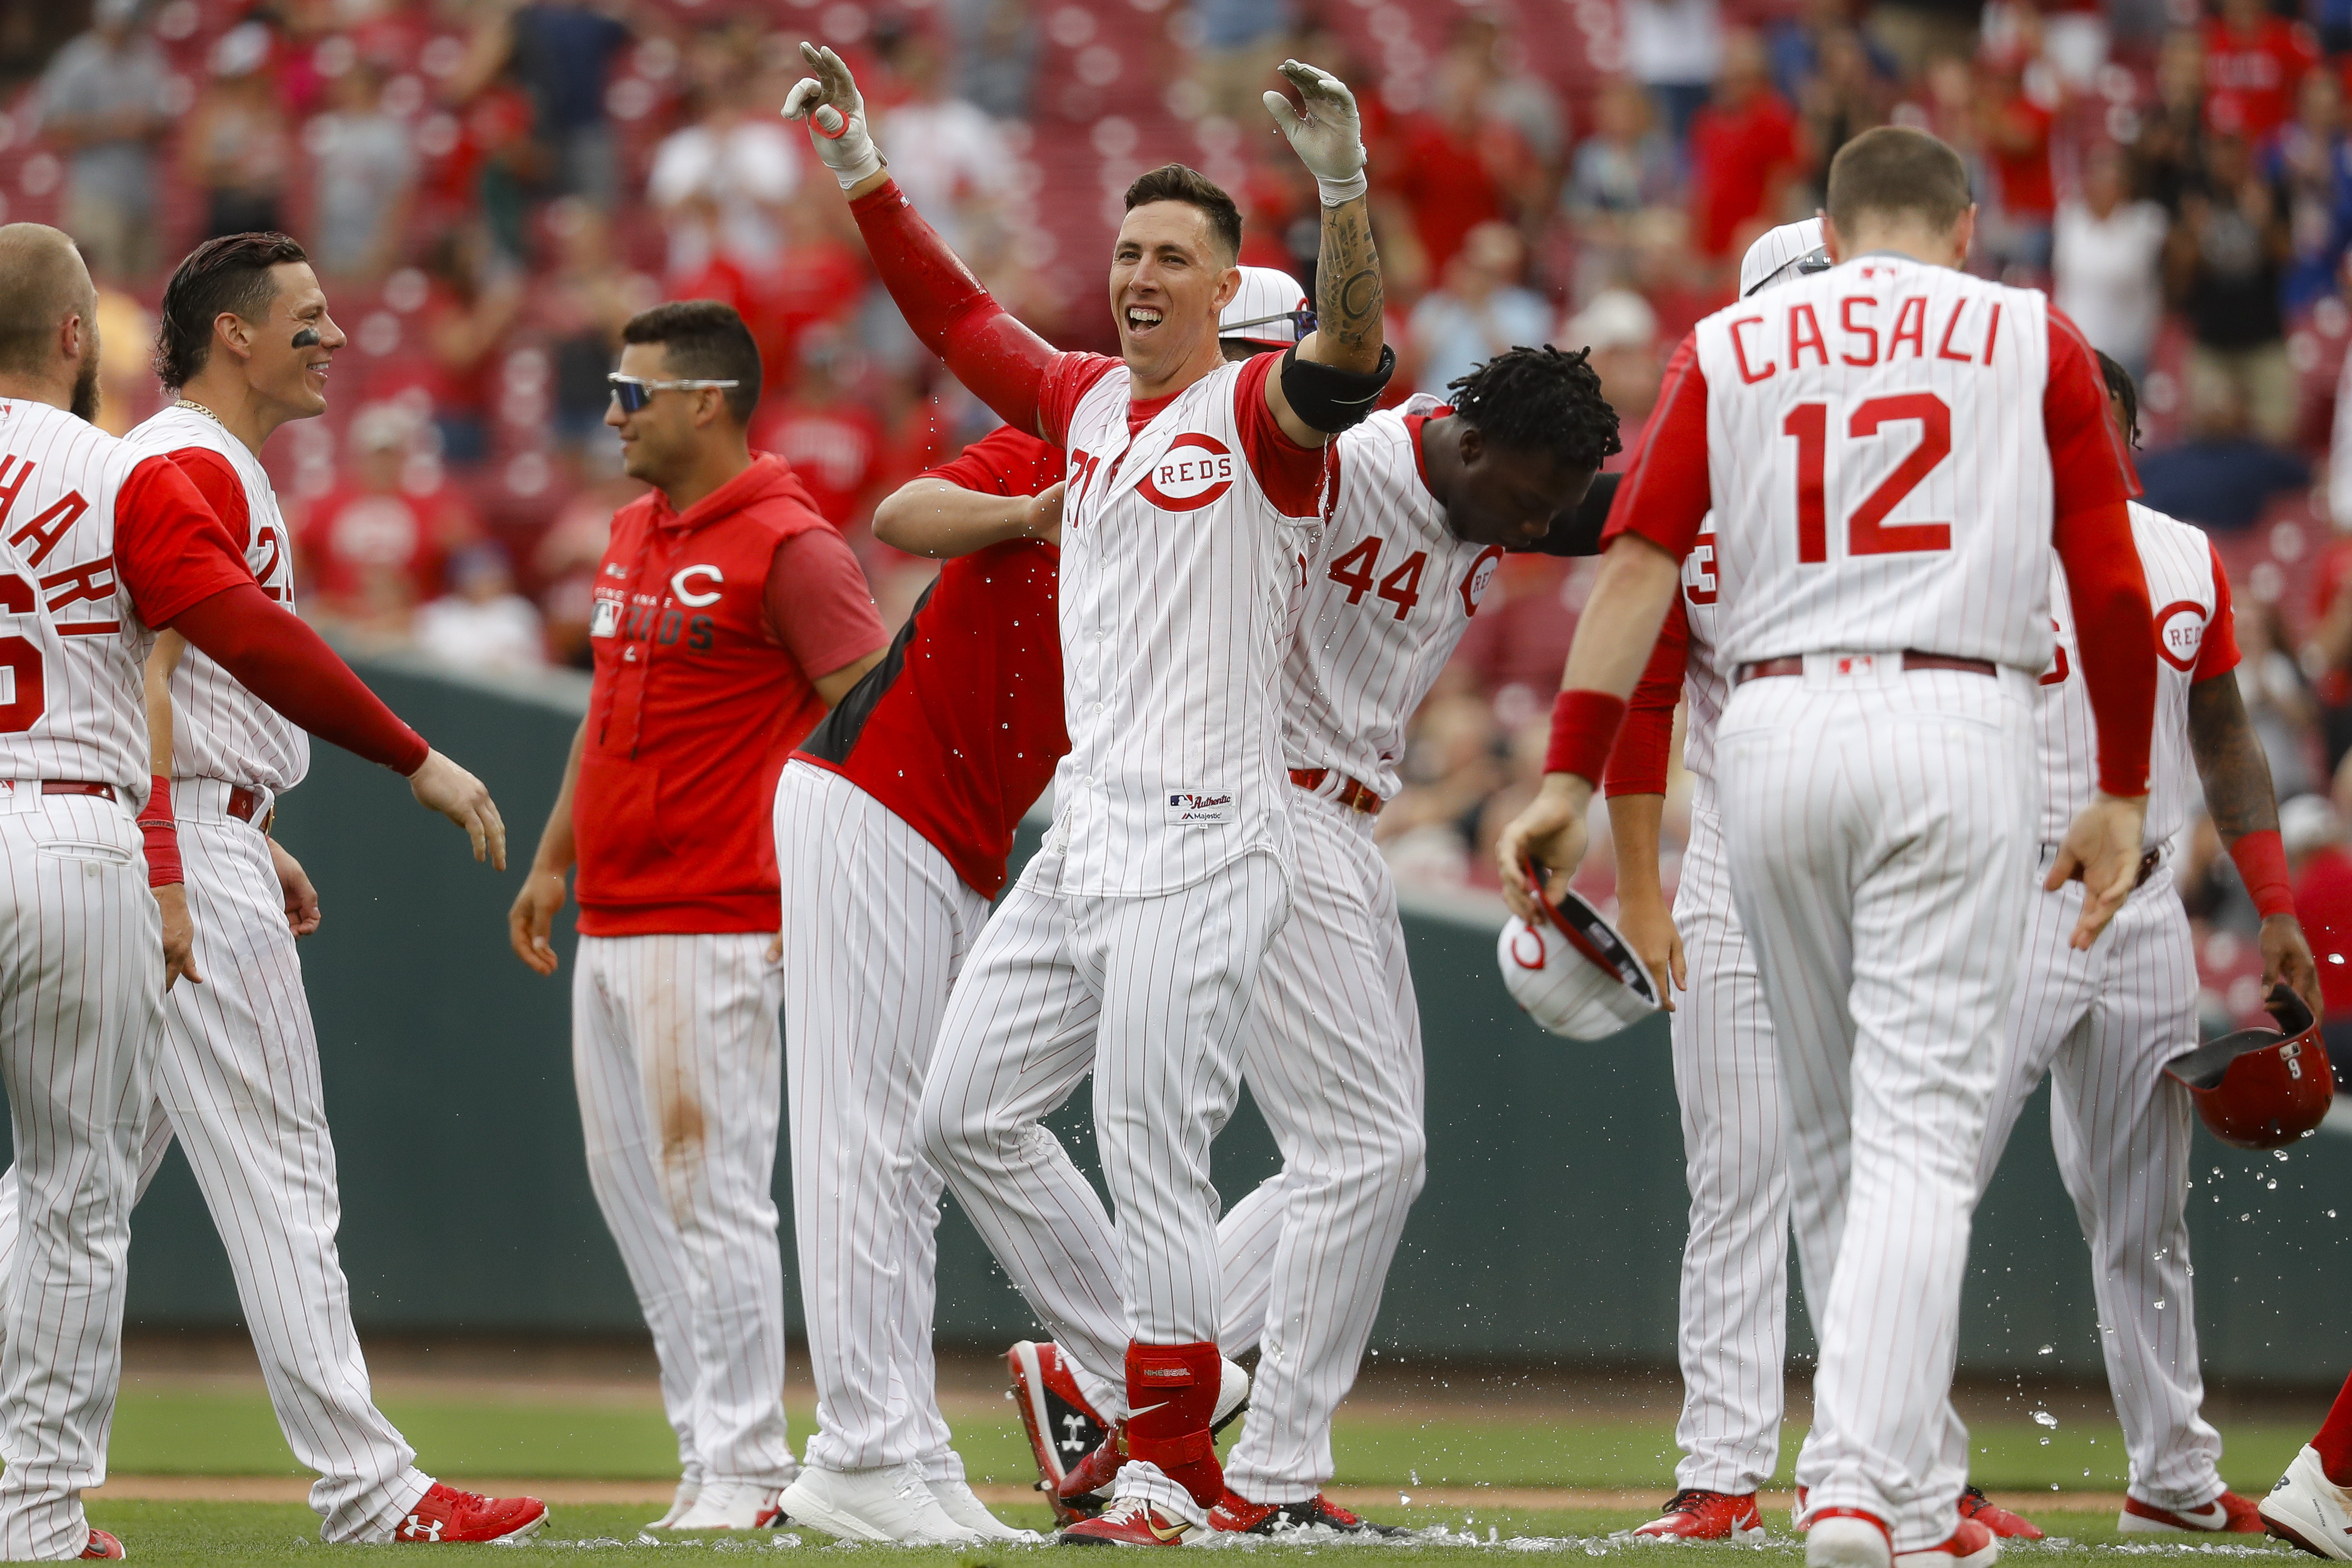 Lorenzen's pinch-hit double lifts Reds over D-backs 4-3